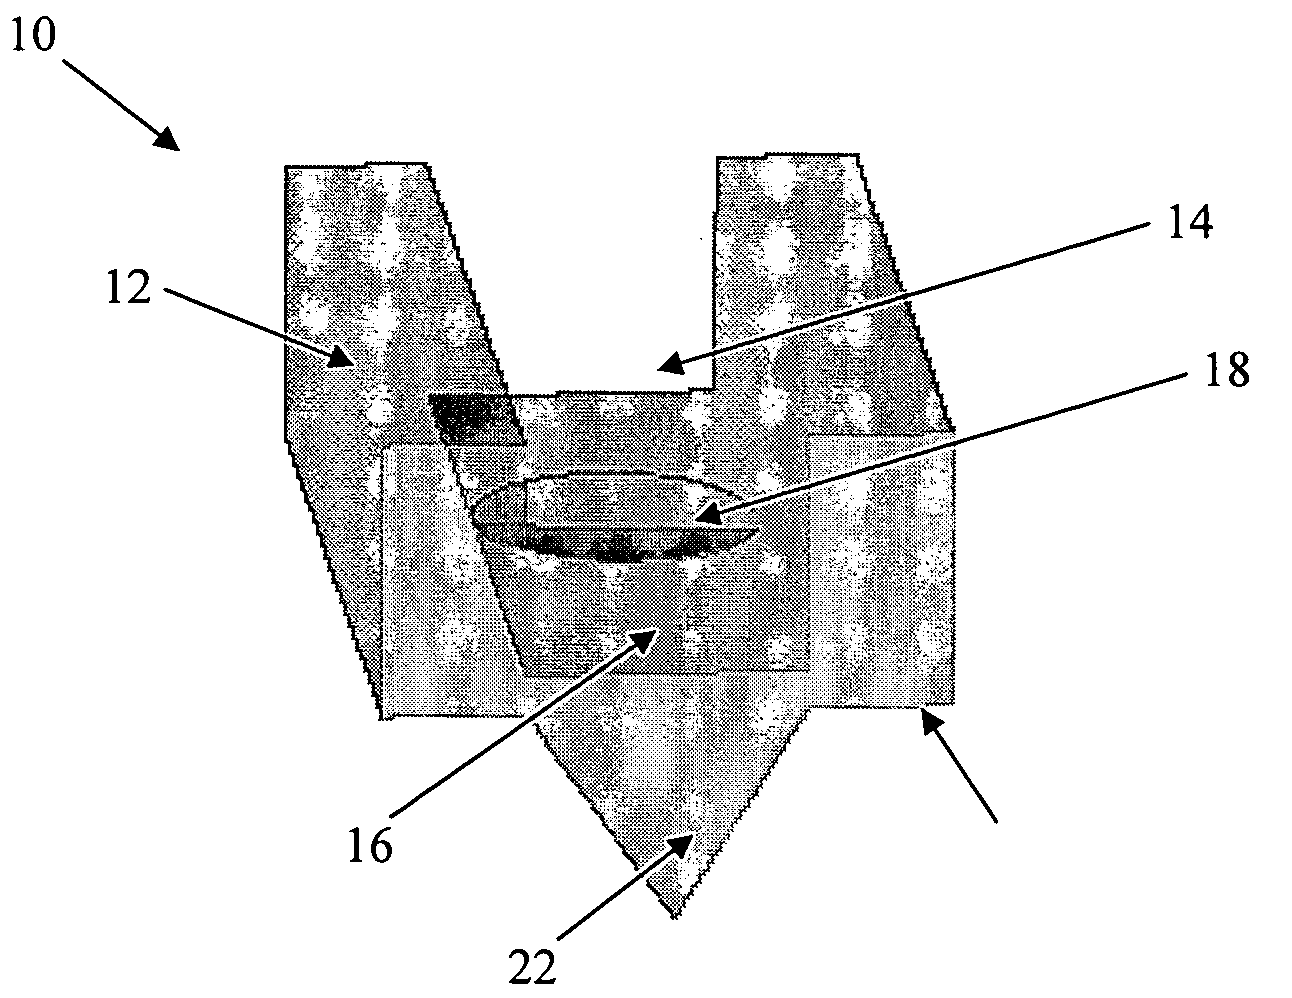 Disposable reaction vessel with integrated optical elements